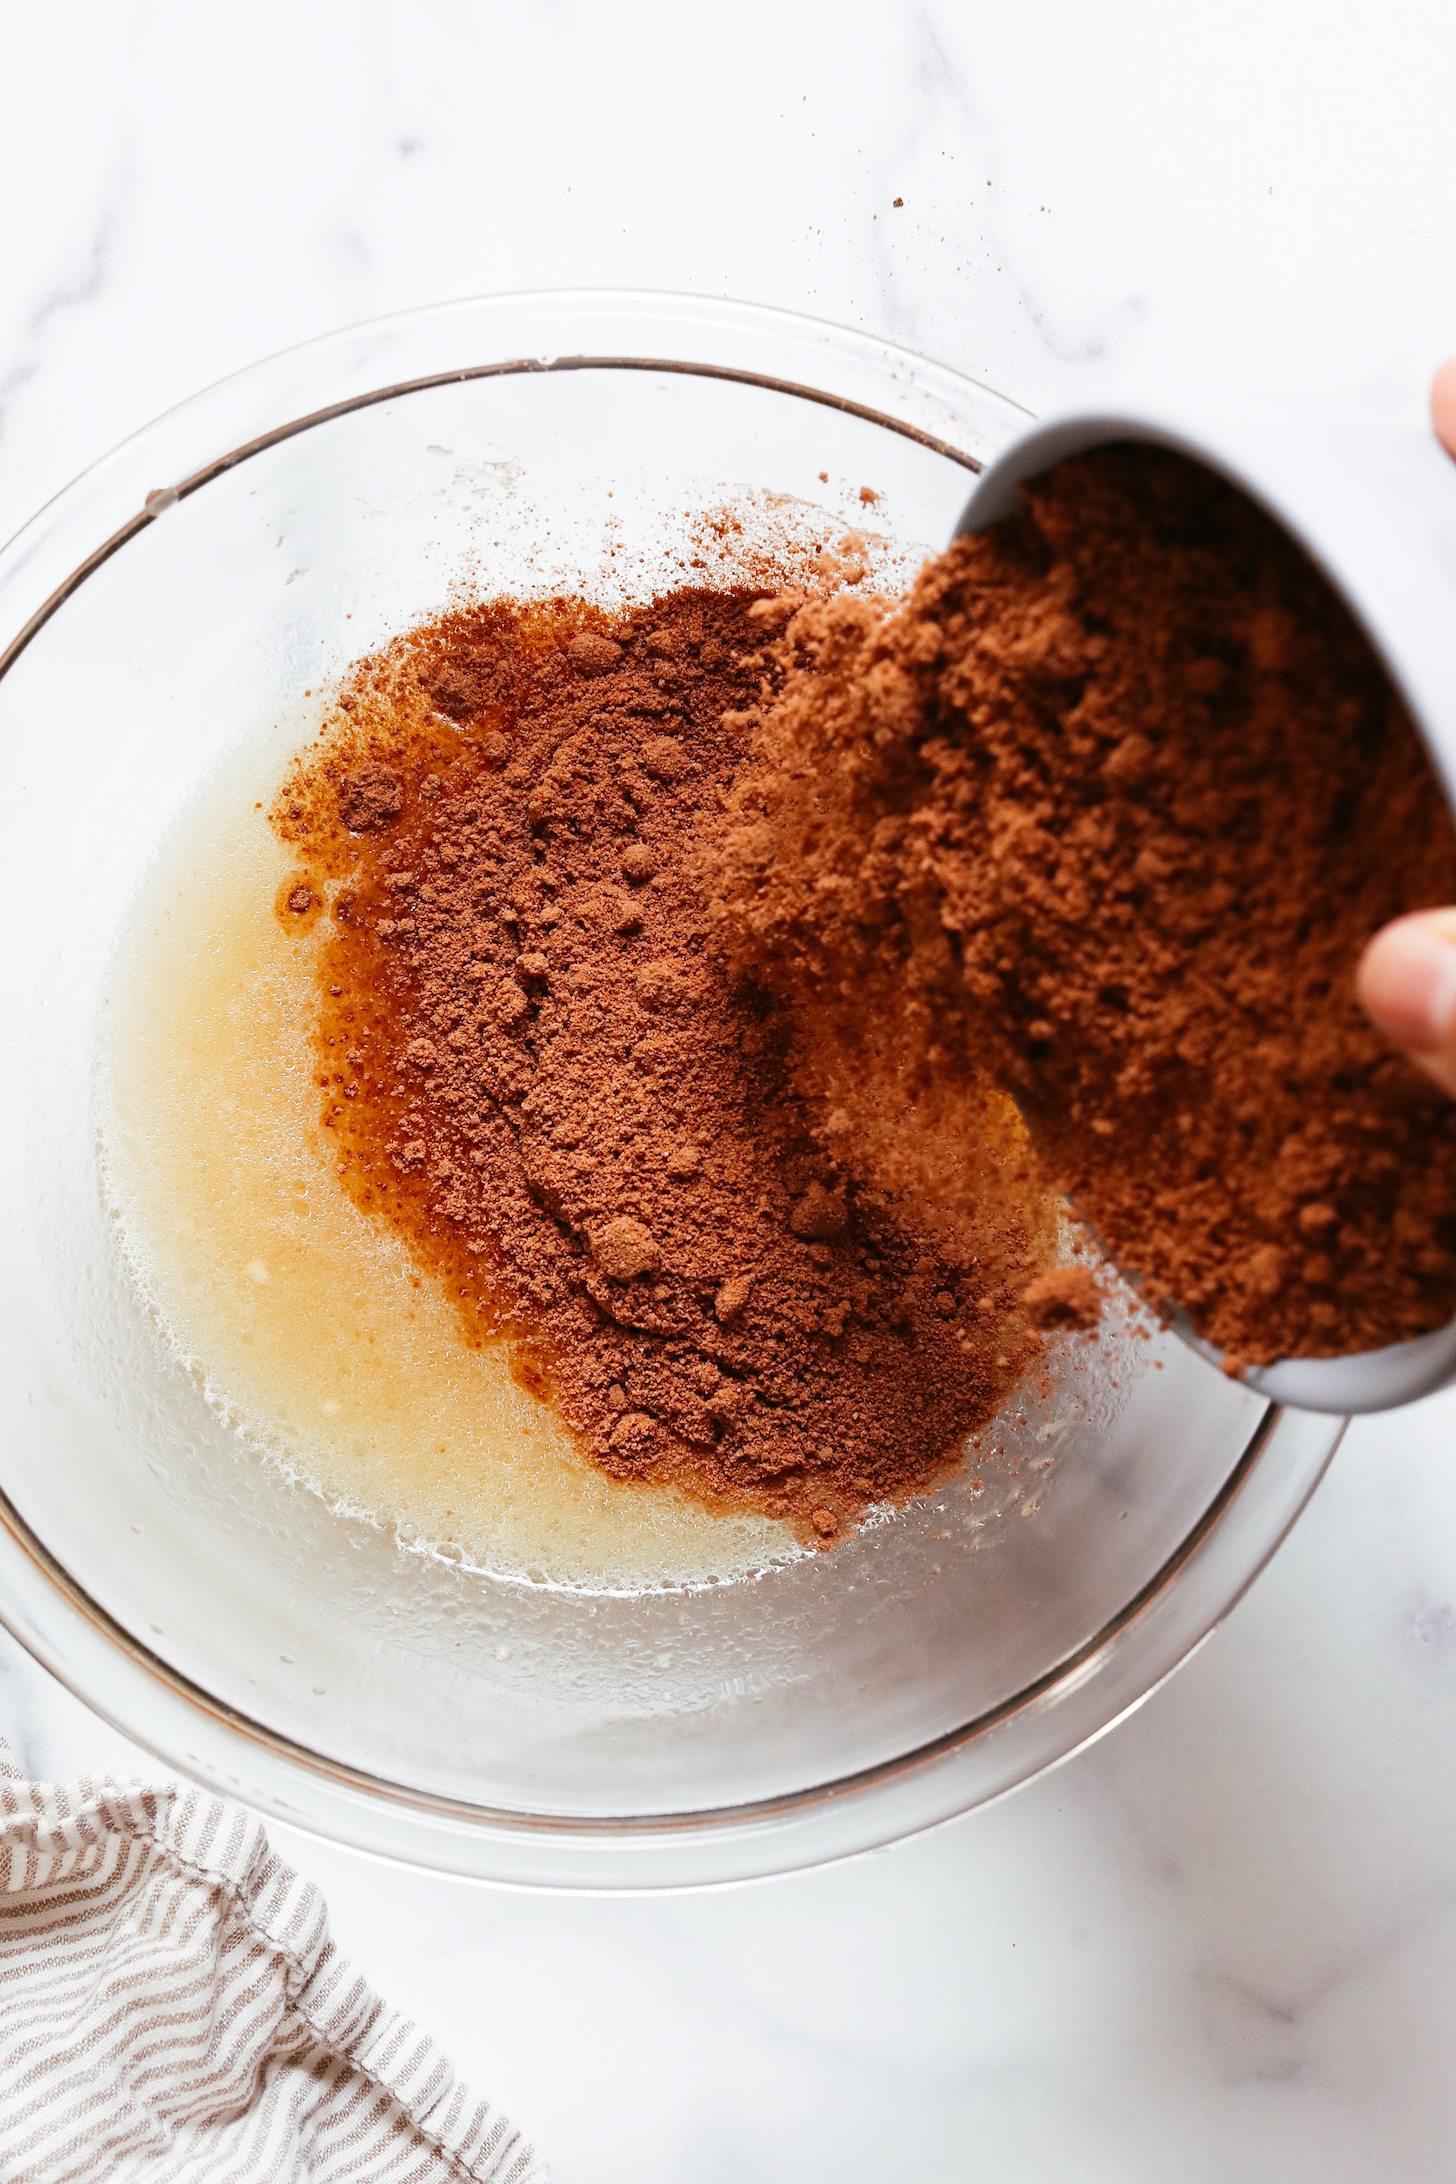 Pouring chocolate cake mix into the wet ingredients